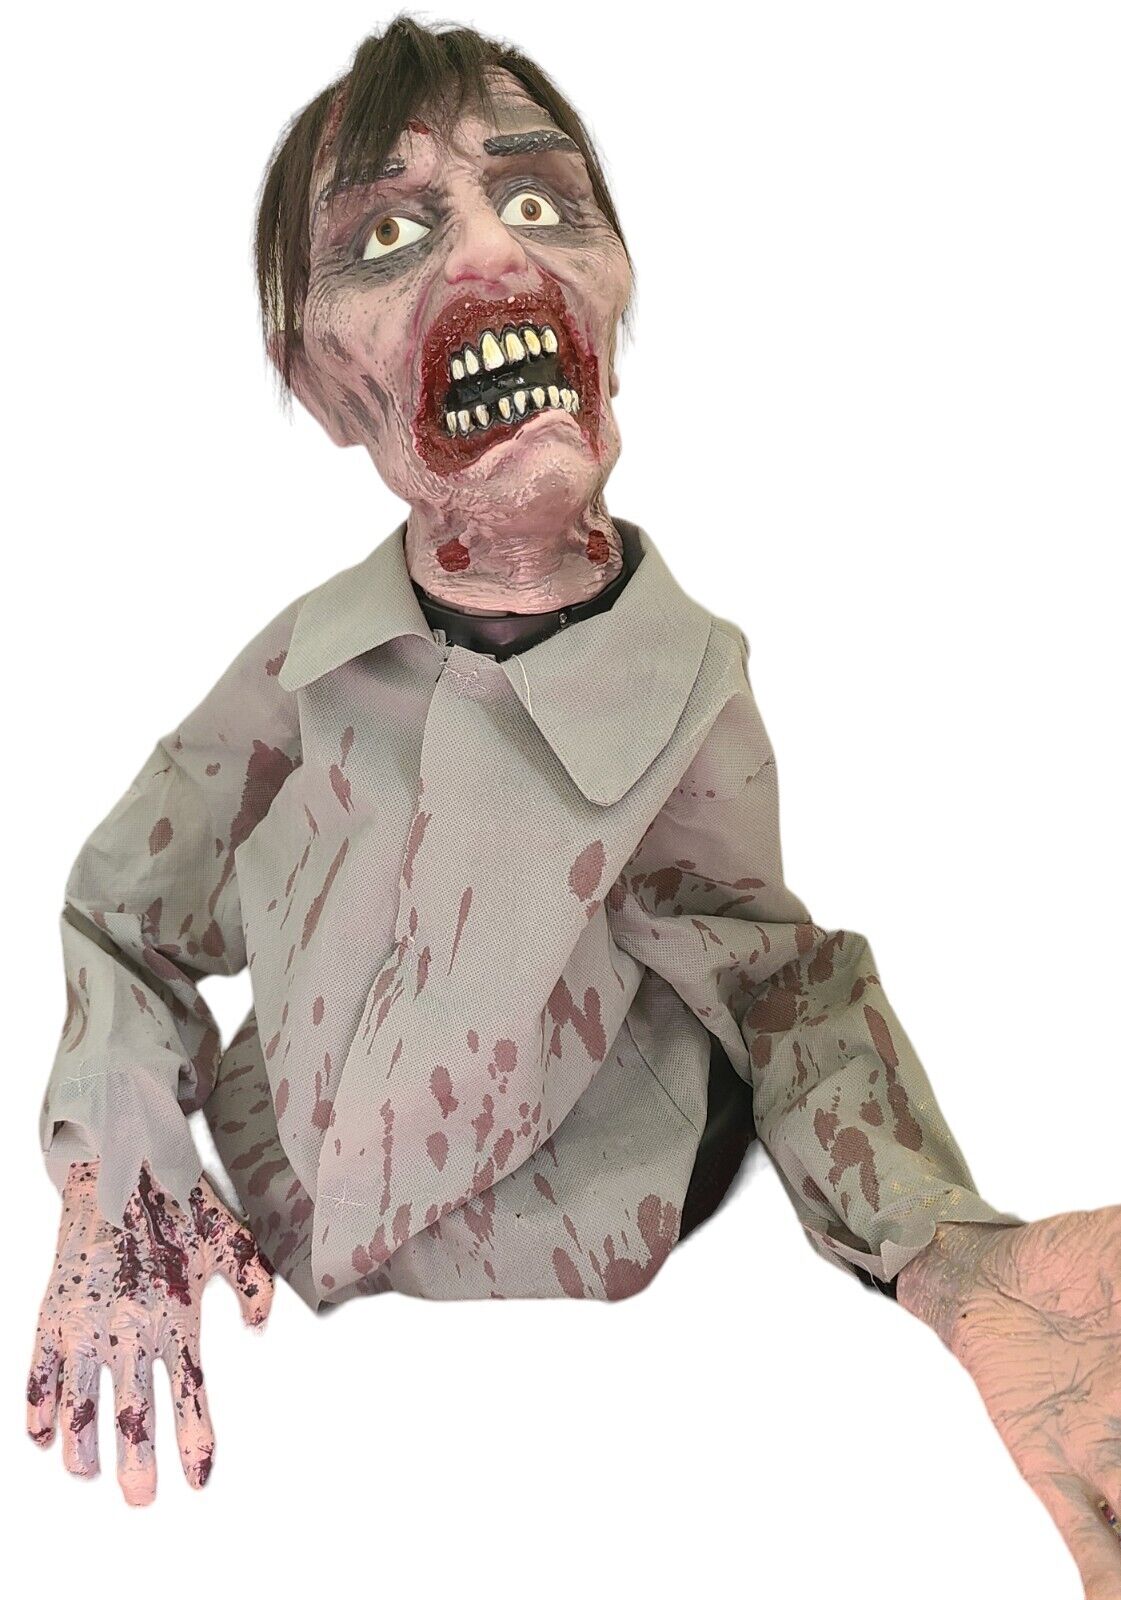 Zombie Automated Halloween Prop Decoration Creepy Music Moves Around Battery New